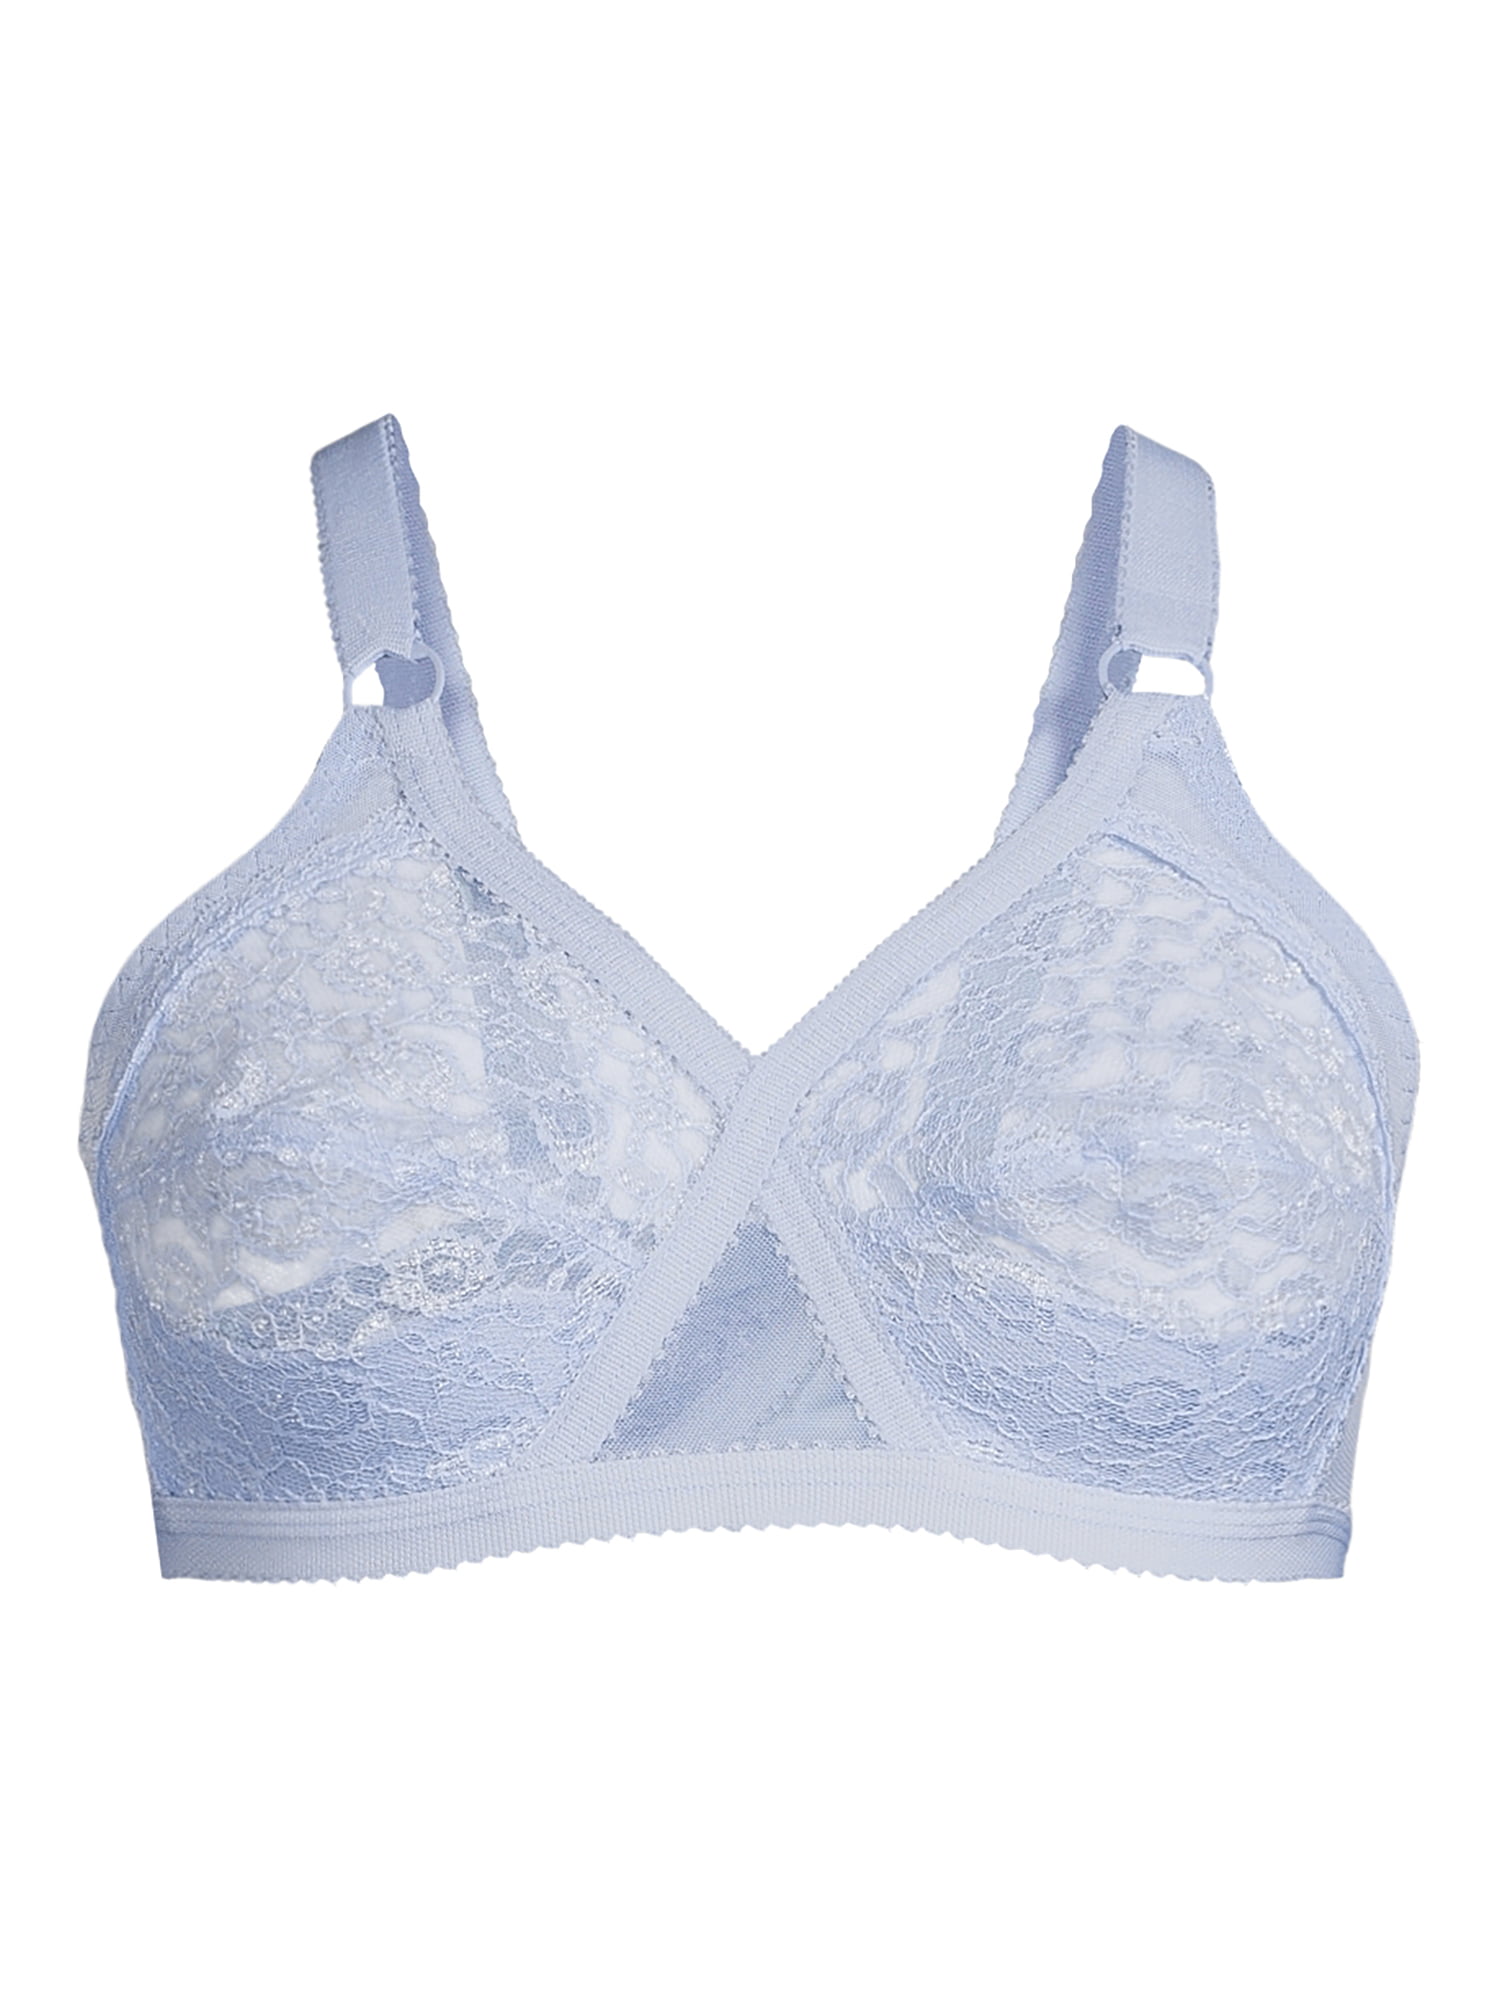 Wynette by Valmont Women's Lace Crossover Bra 